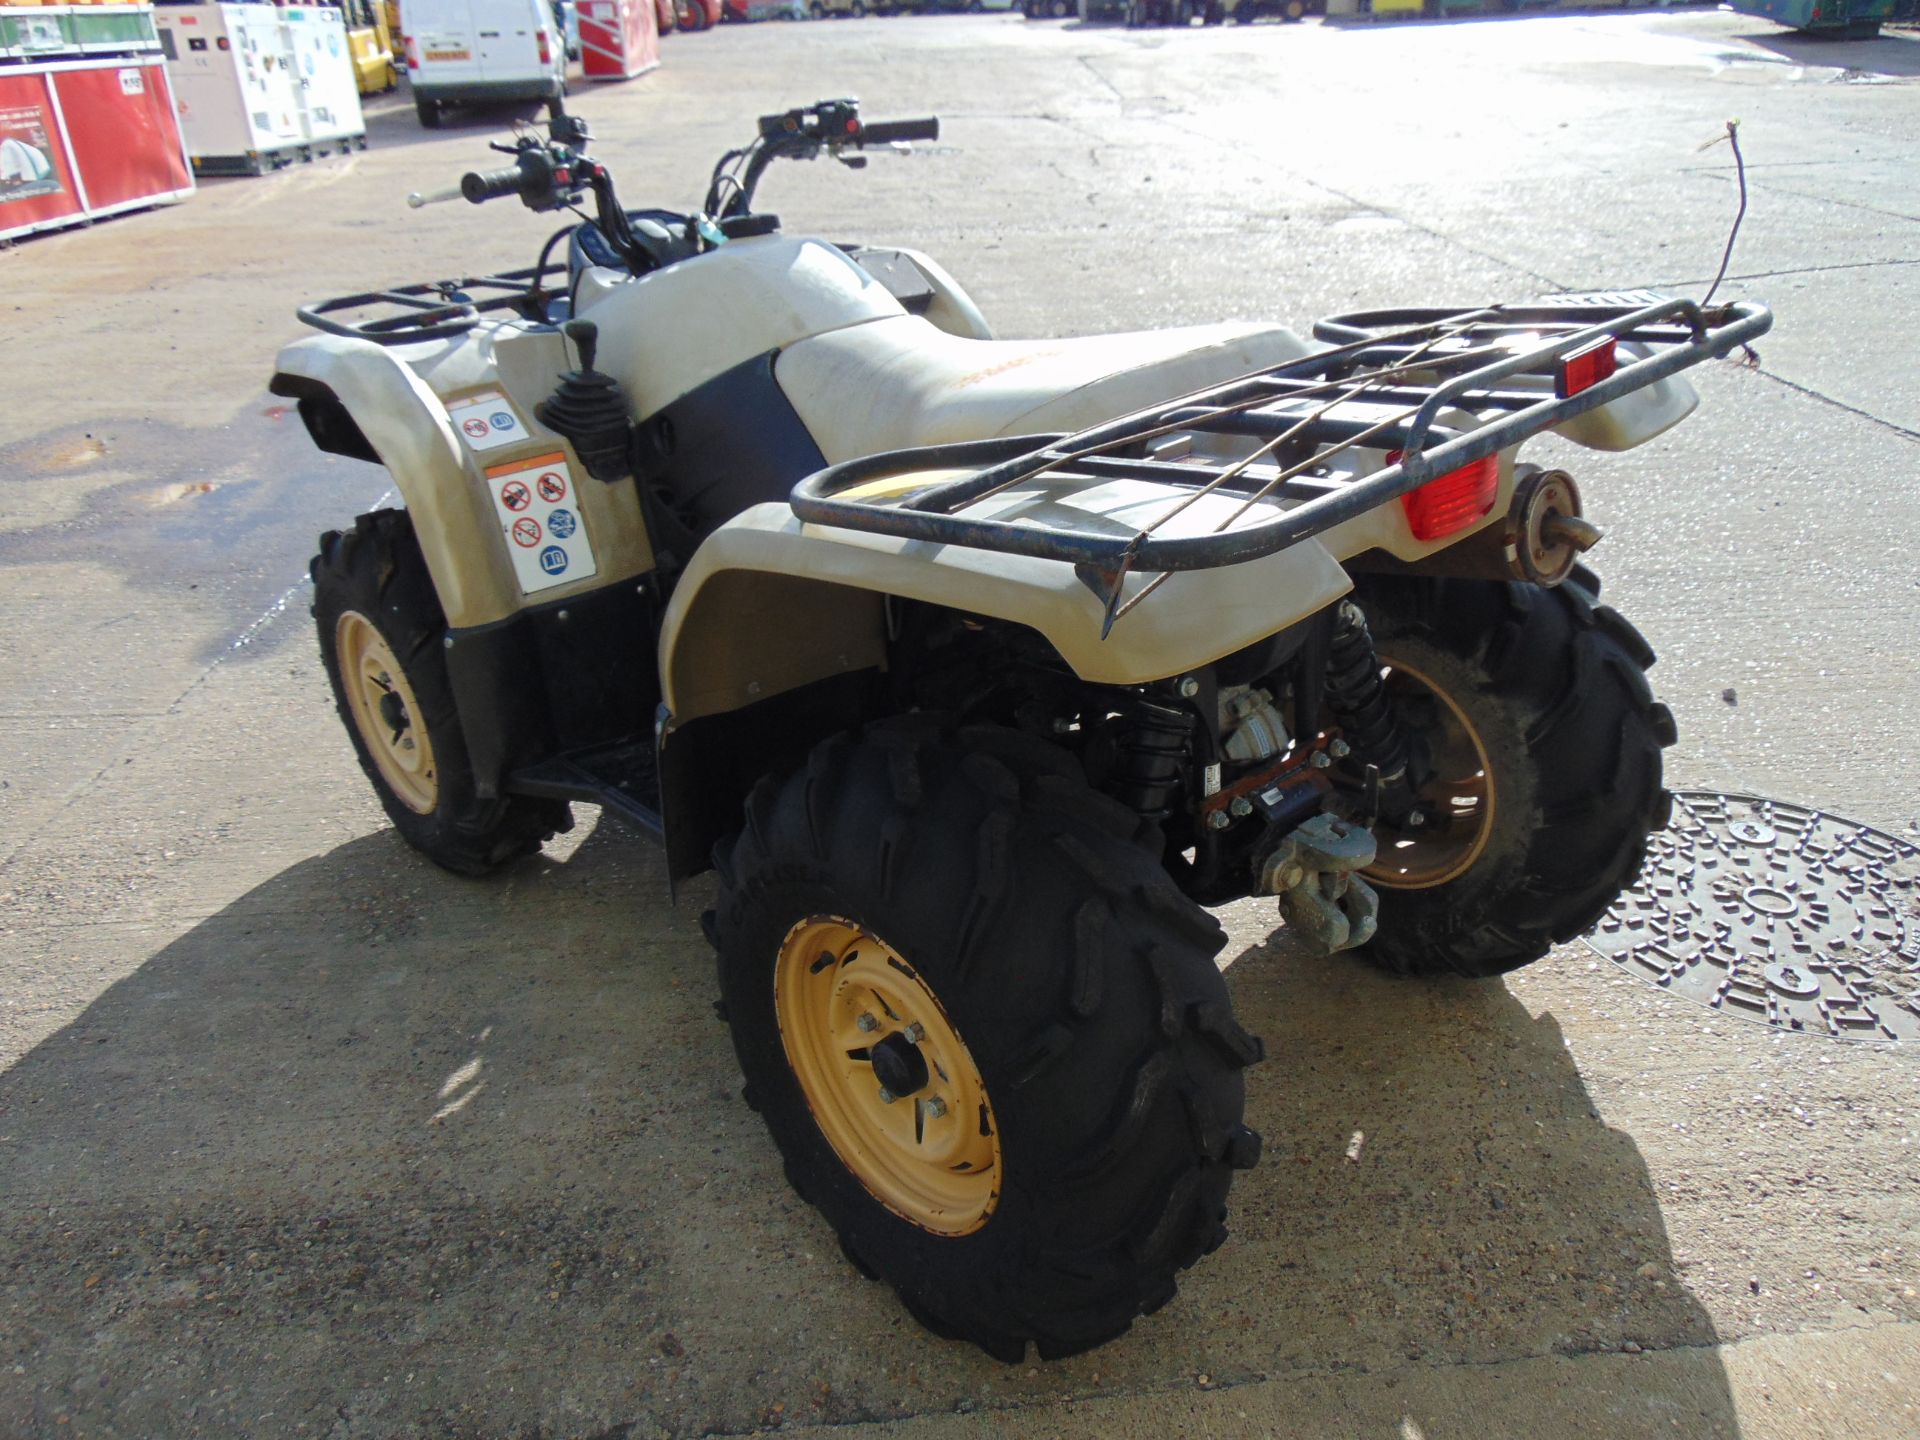 Recent Release Military Specification Yamaha Grizzly 450 4 x 4 ATV Quad Bike - Image 8 of 15